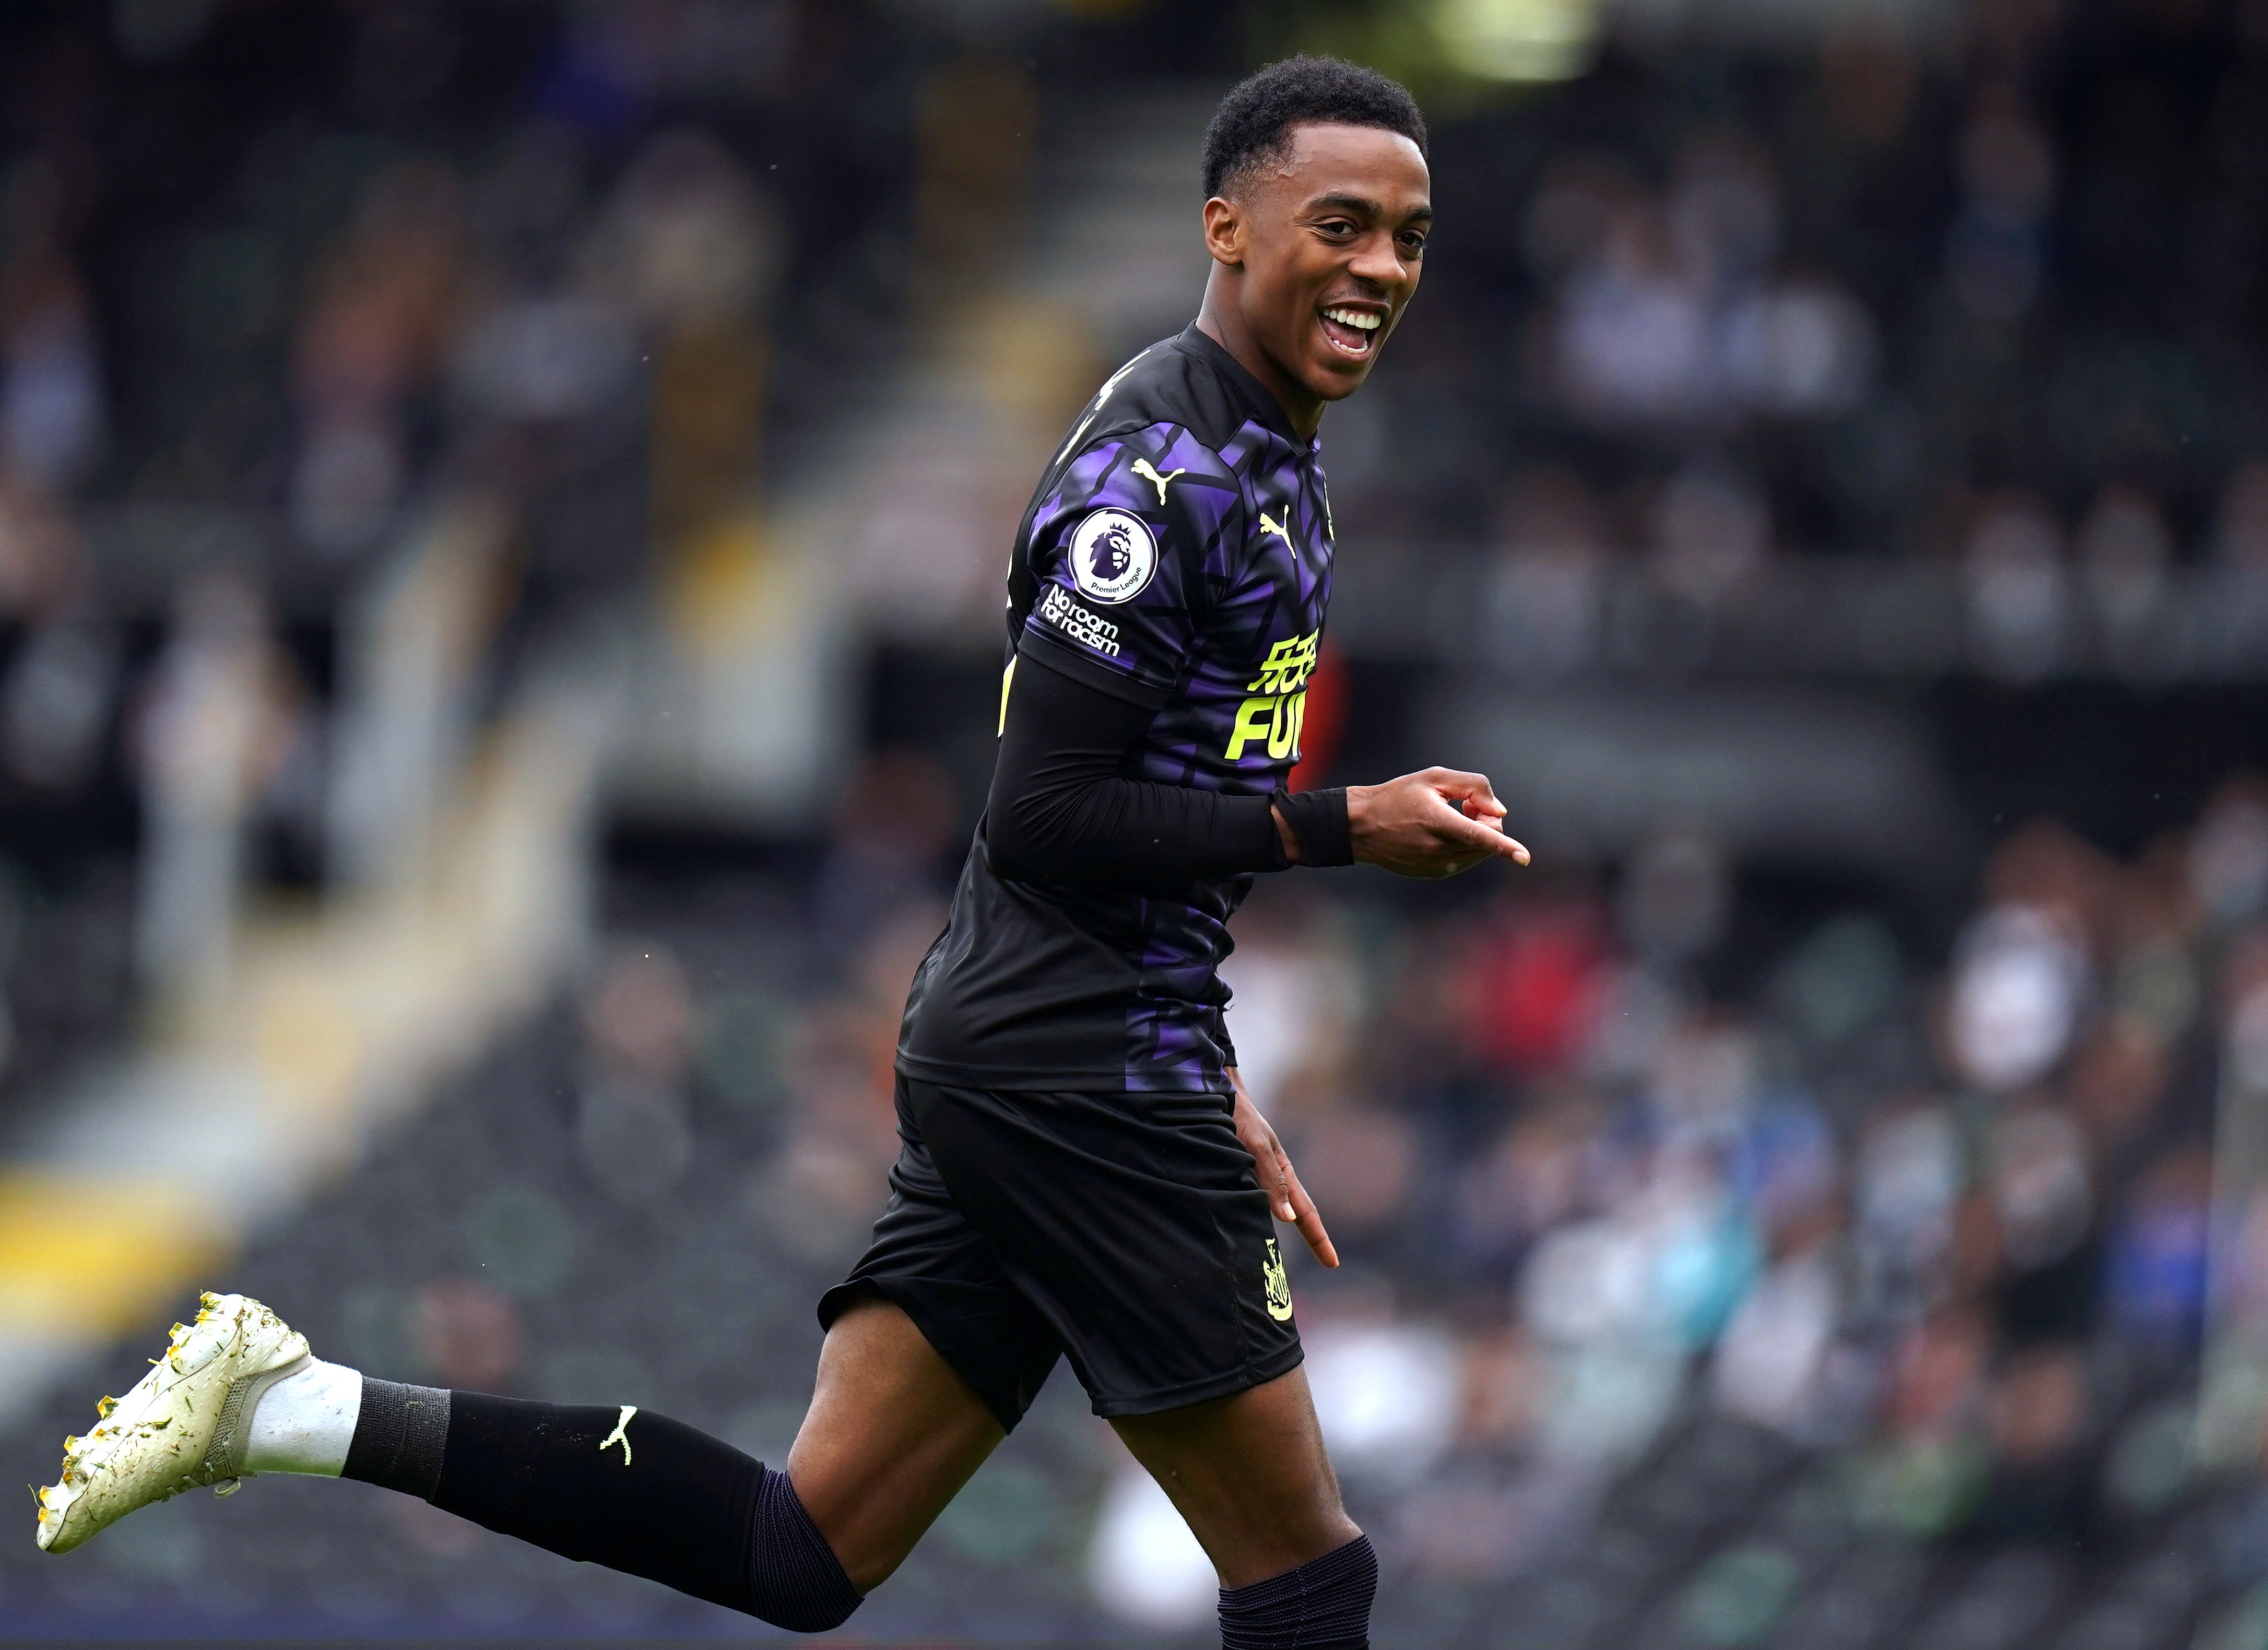 Steve Bruce insisted Joe Willock is enjoying the freedom offered to him at Newcastle after becoming the first player since Alan Shearer to score in seven consecutive Premier League games